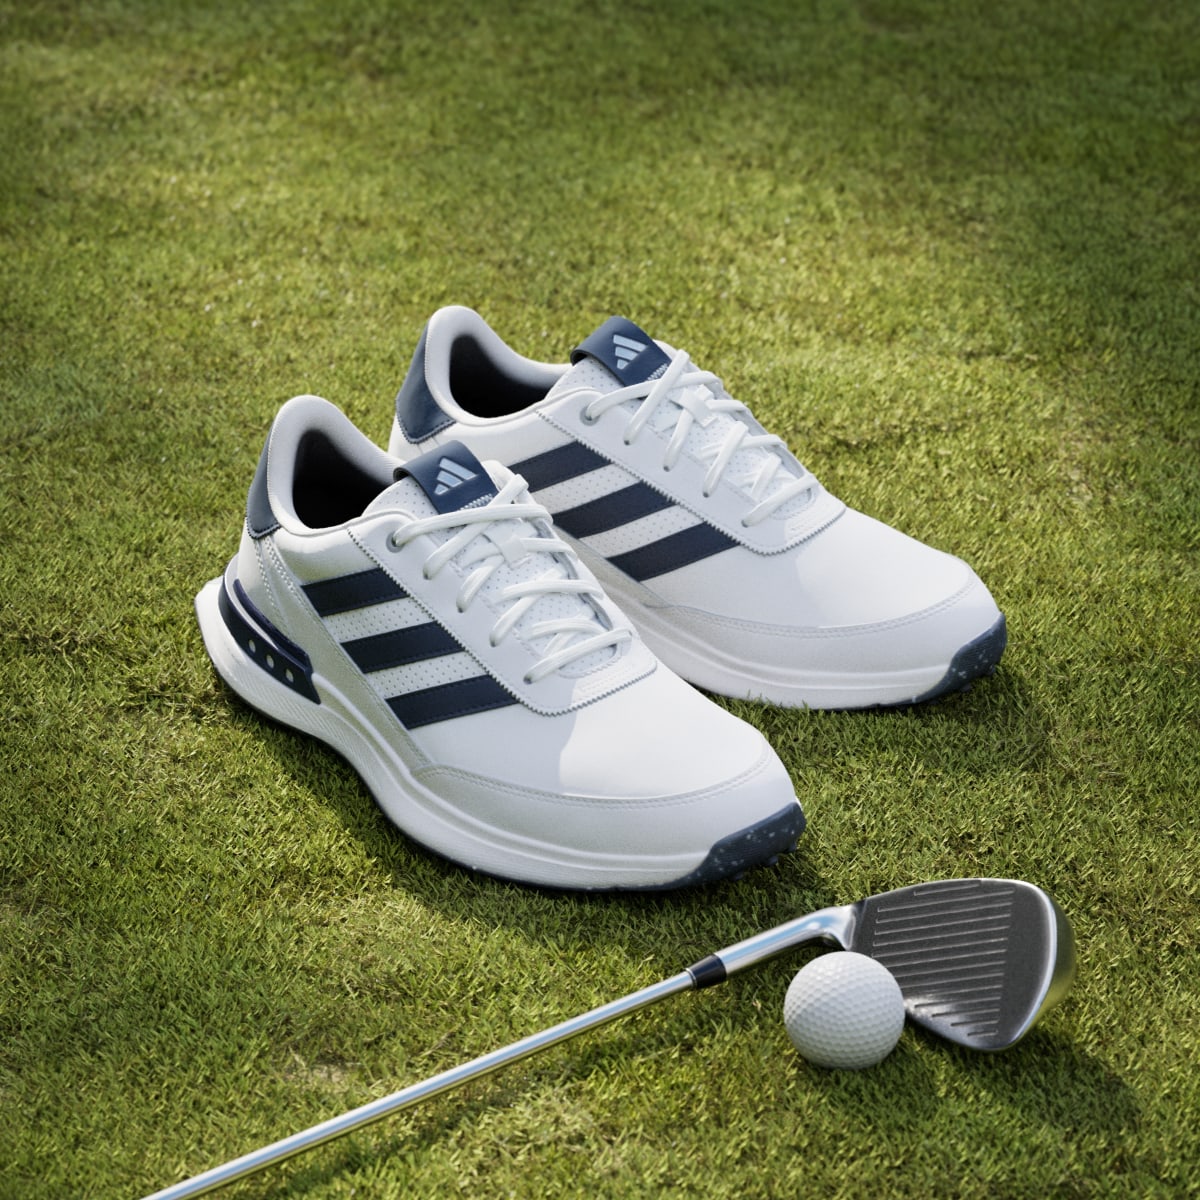 Adidas S2G Spikeless Leather 24 Golf Shoes. 4